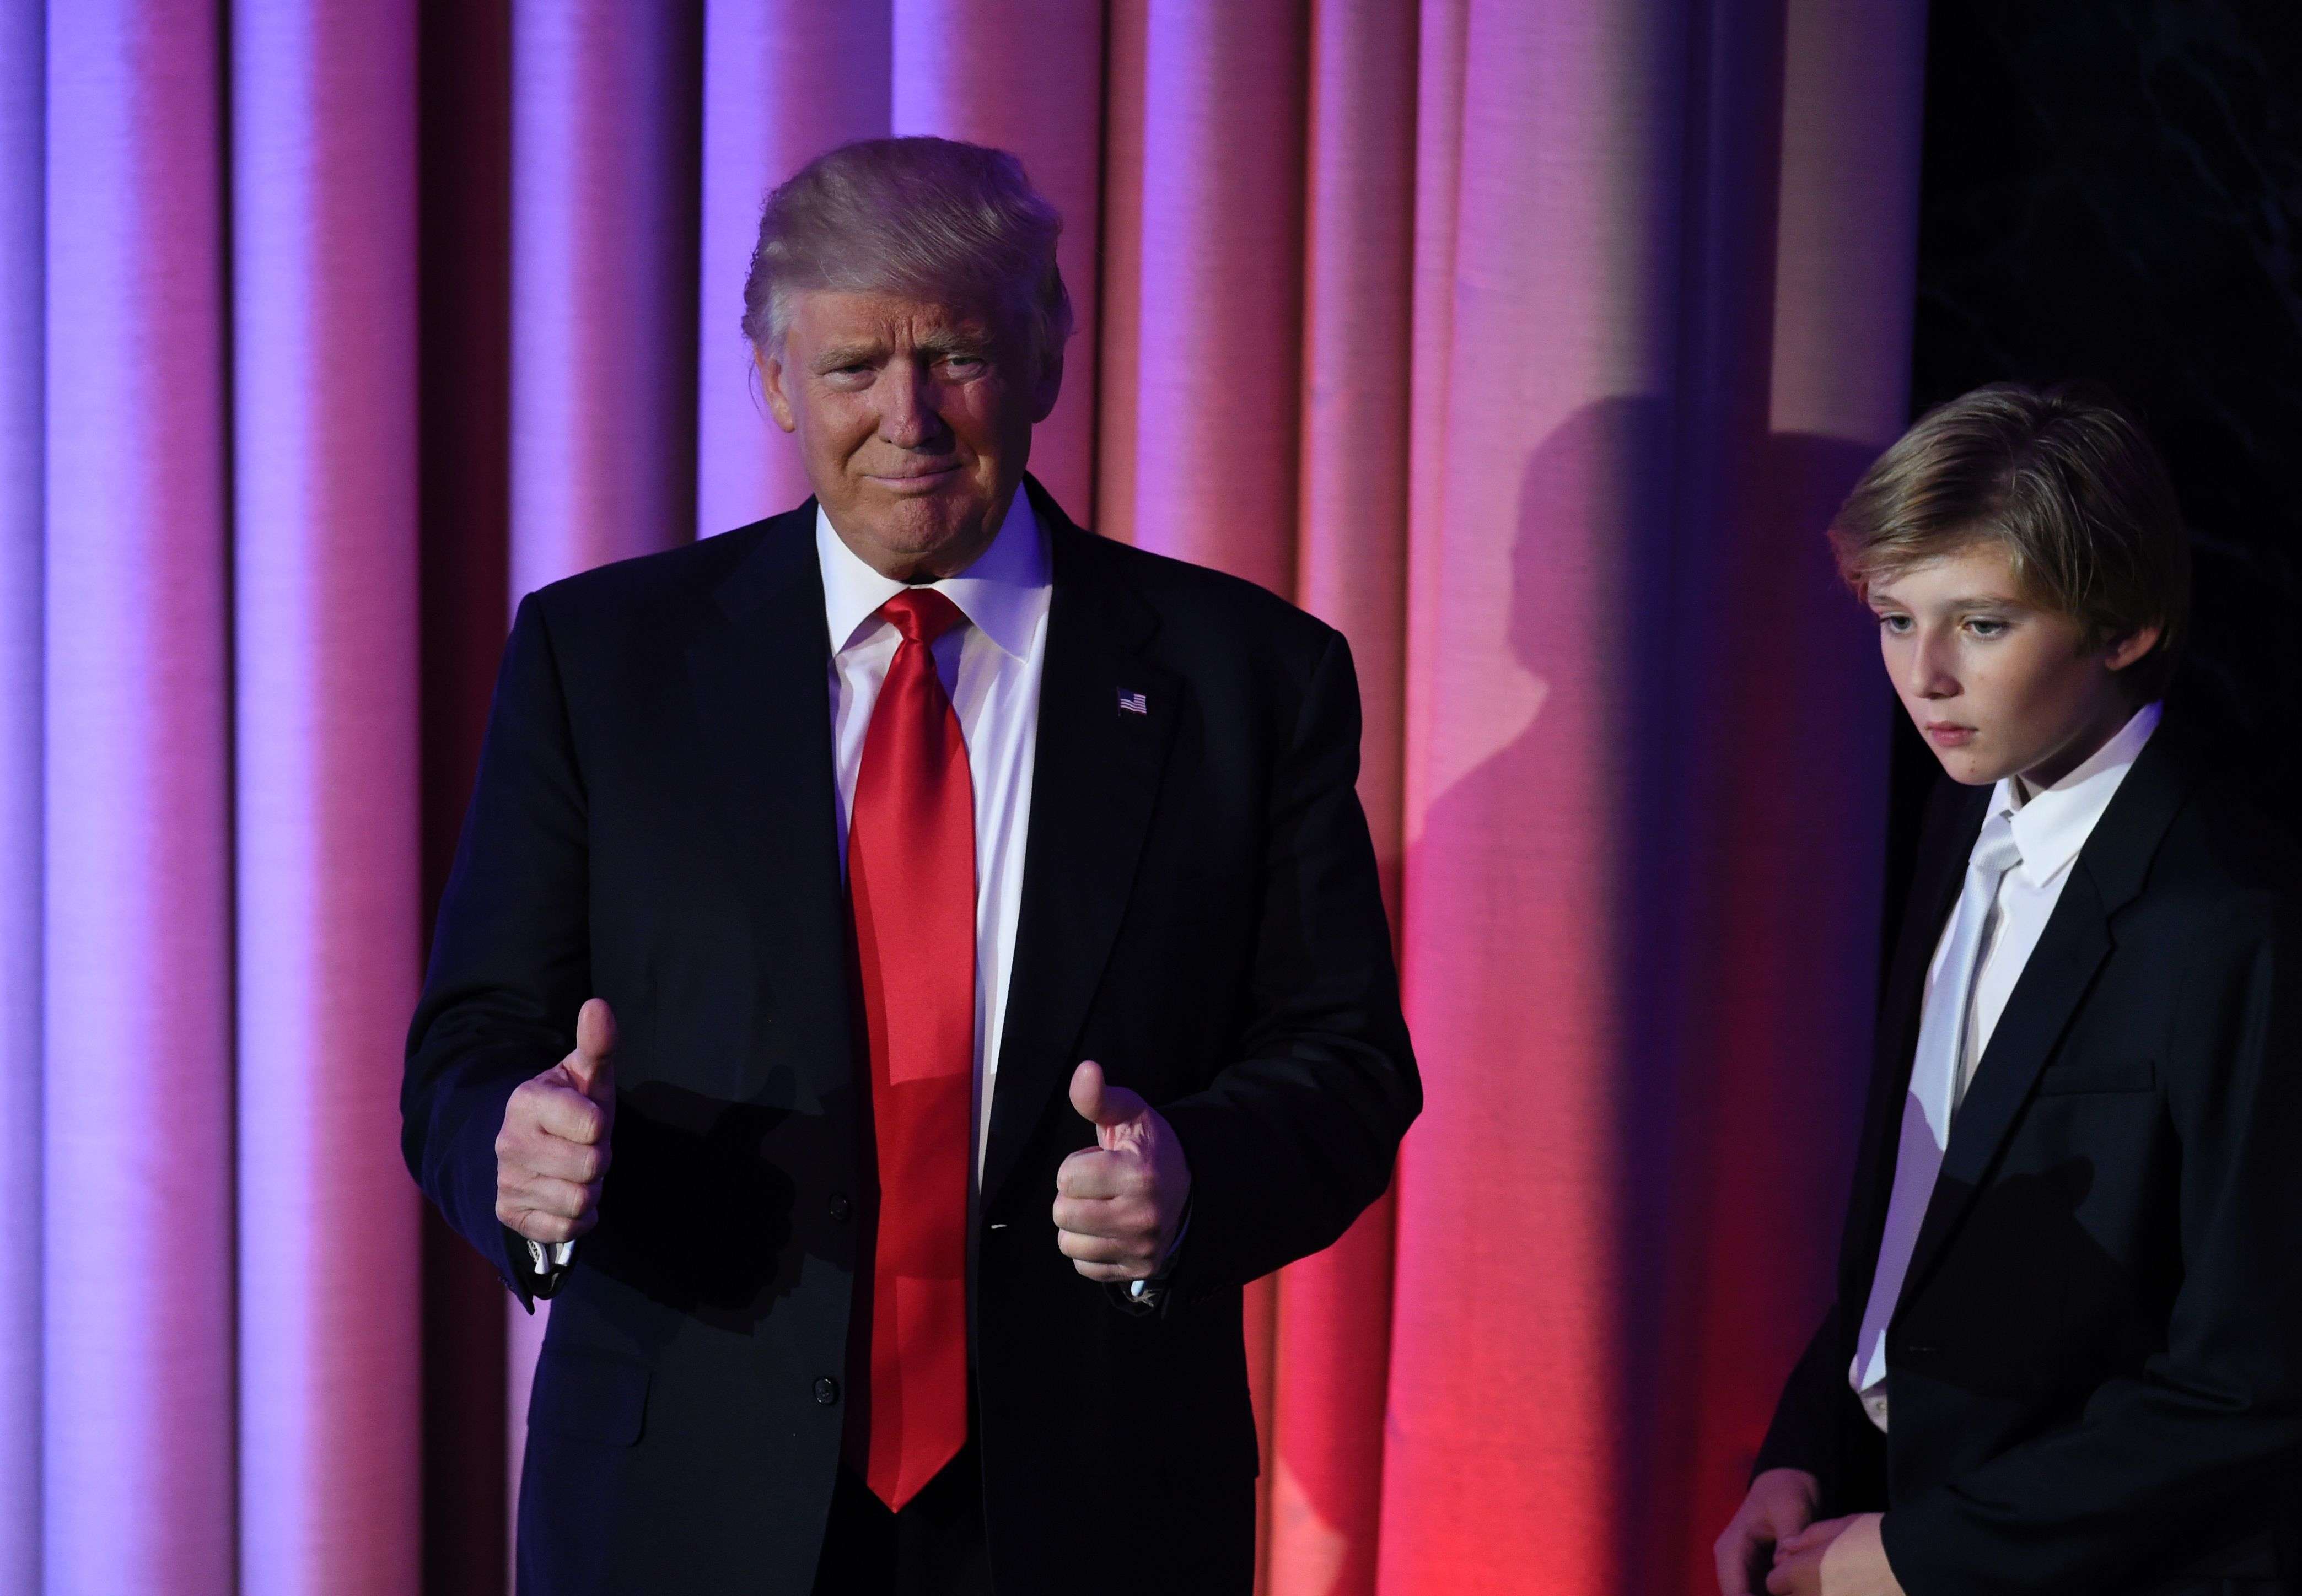 TOPSHOT - US President-elect Donald Trump arrives with his son Baron at the New York Hilton Midtown in New York on November 8, 2016.  Trump stunned America and the world Wednesday, riding a wave of populist resentment to defeat Hillary Clinton in the race to become the 45th president of the United States. / AFP PHOTO / SAUL LOEB